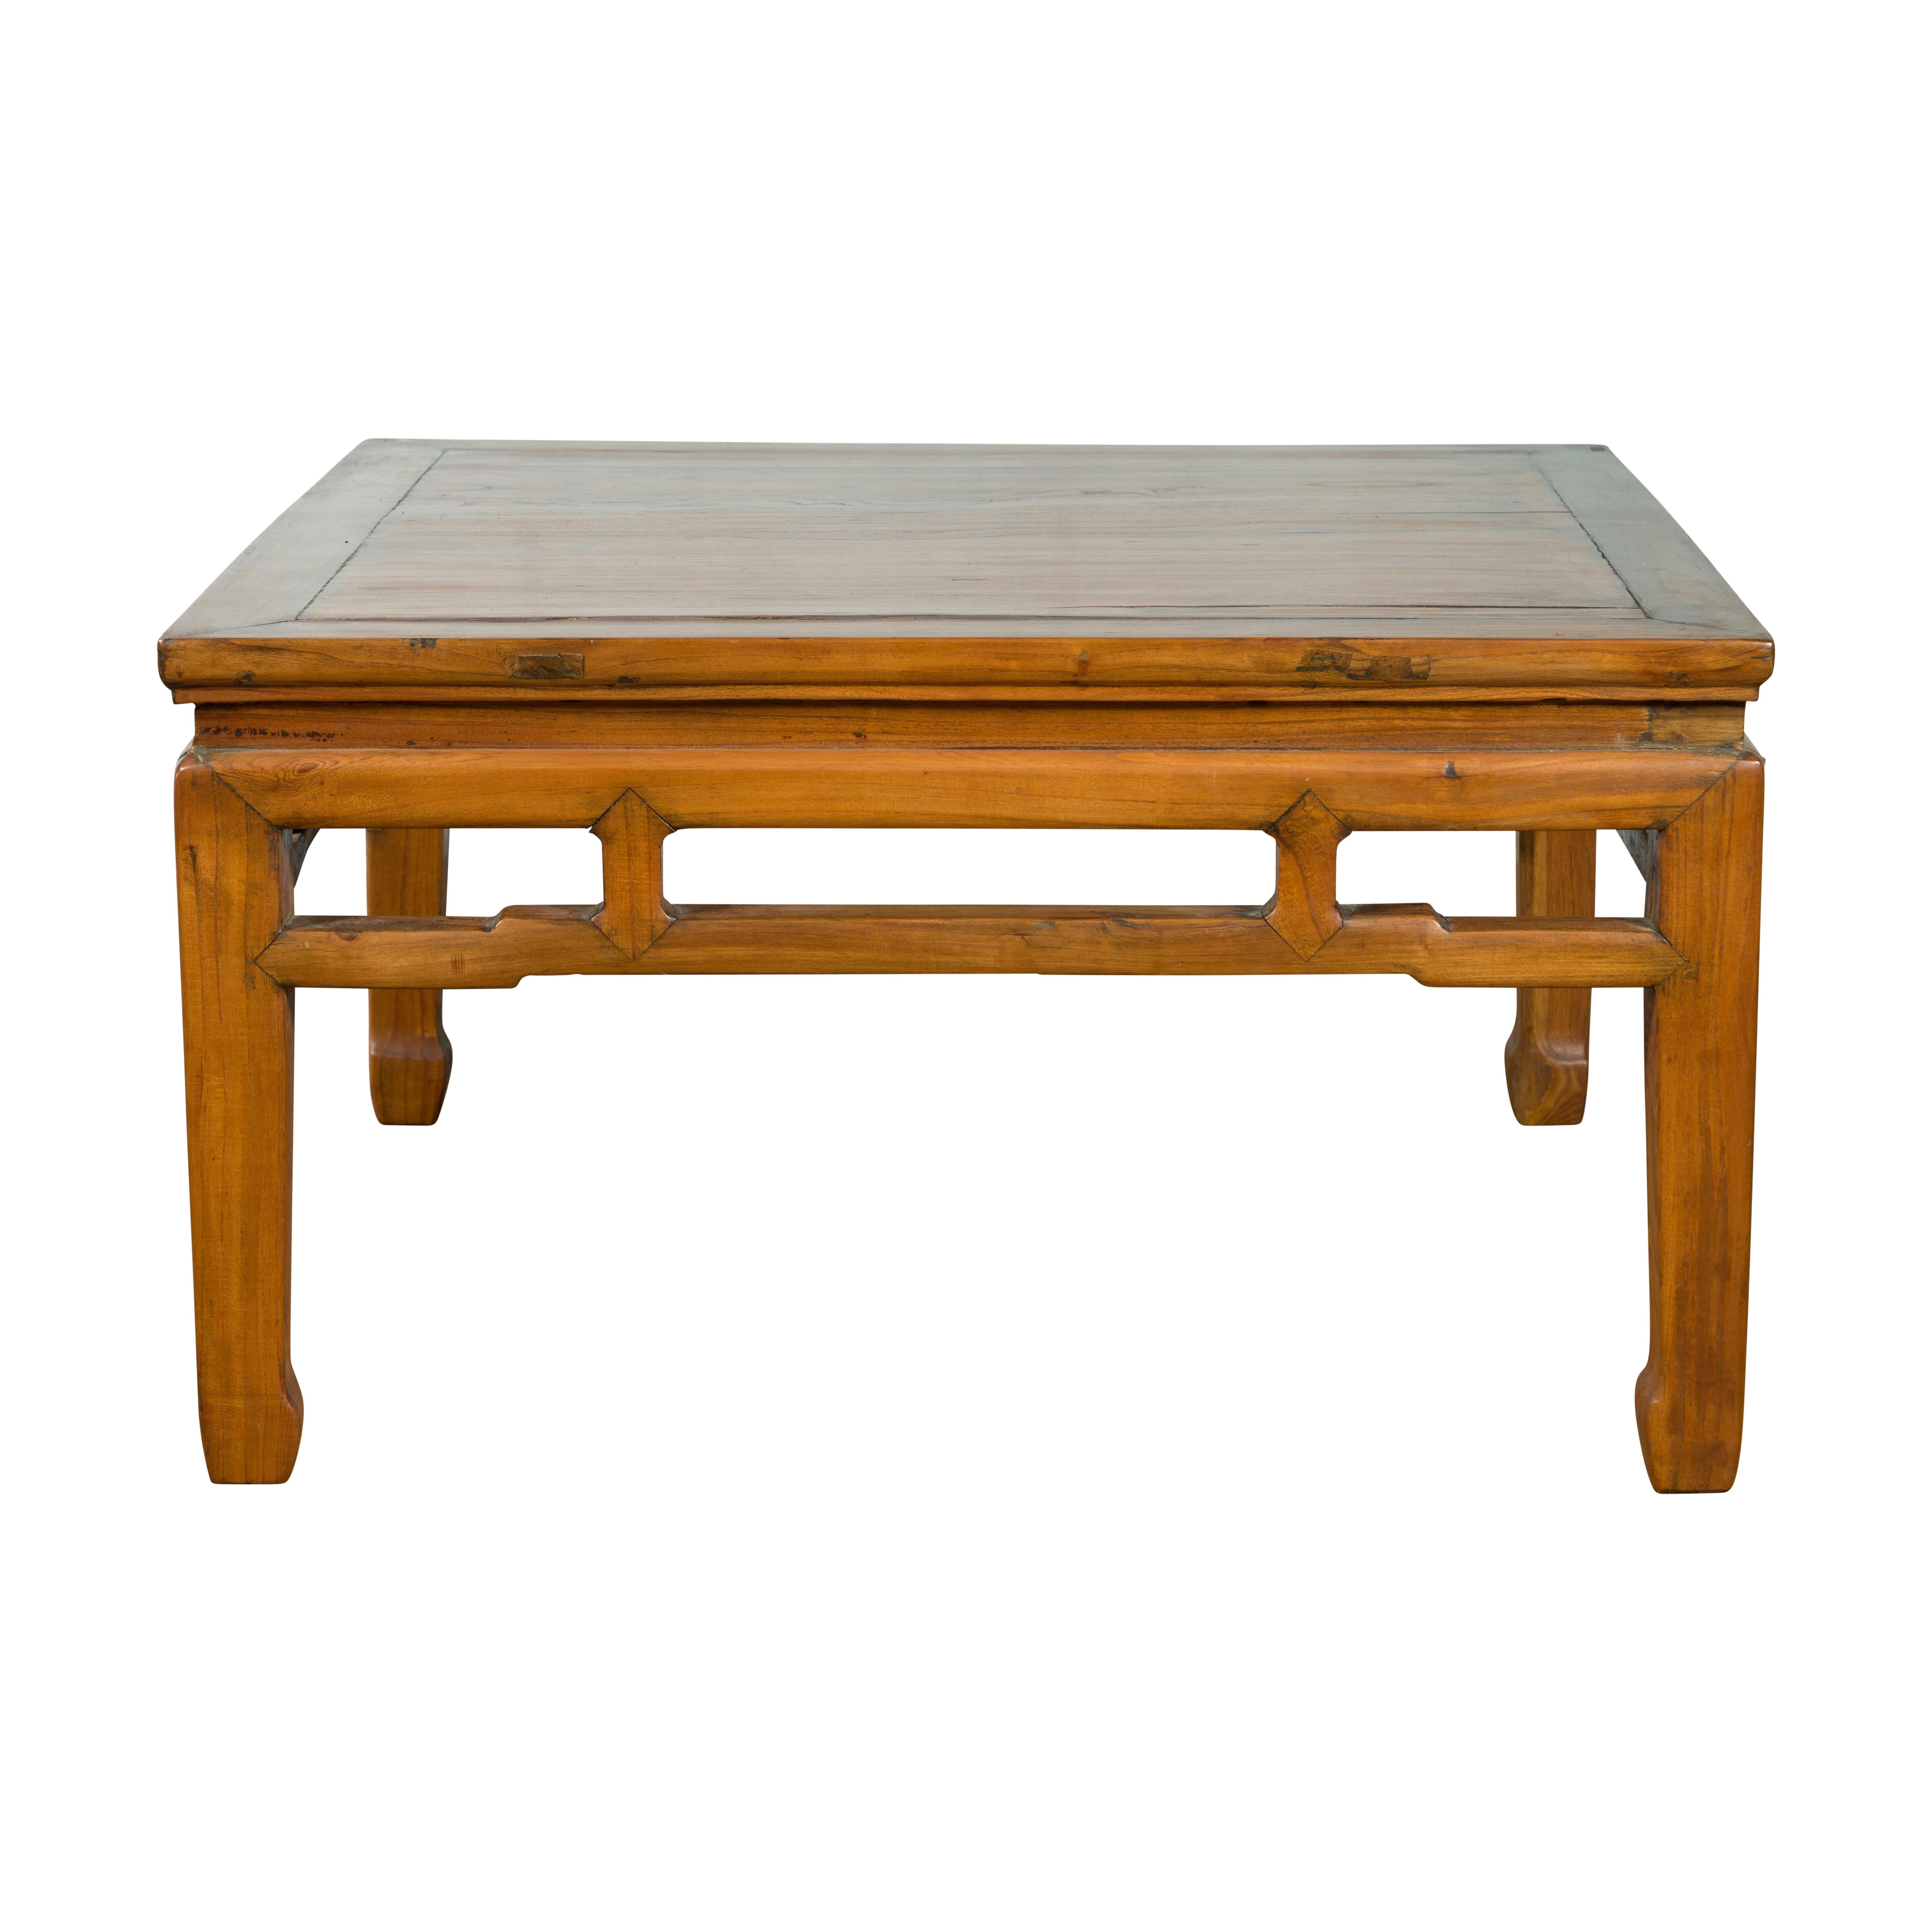 Chinese Qing Dynasty Low Table with Humpback Stretcher and Horse Hoof Feet